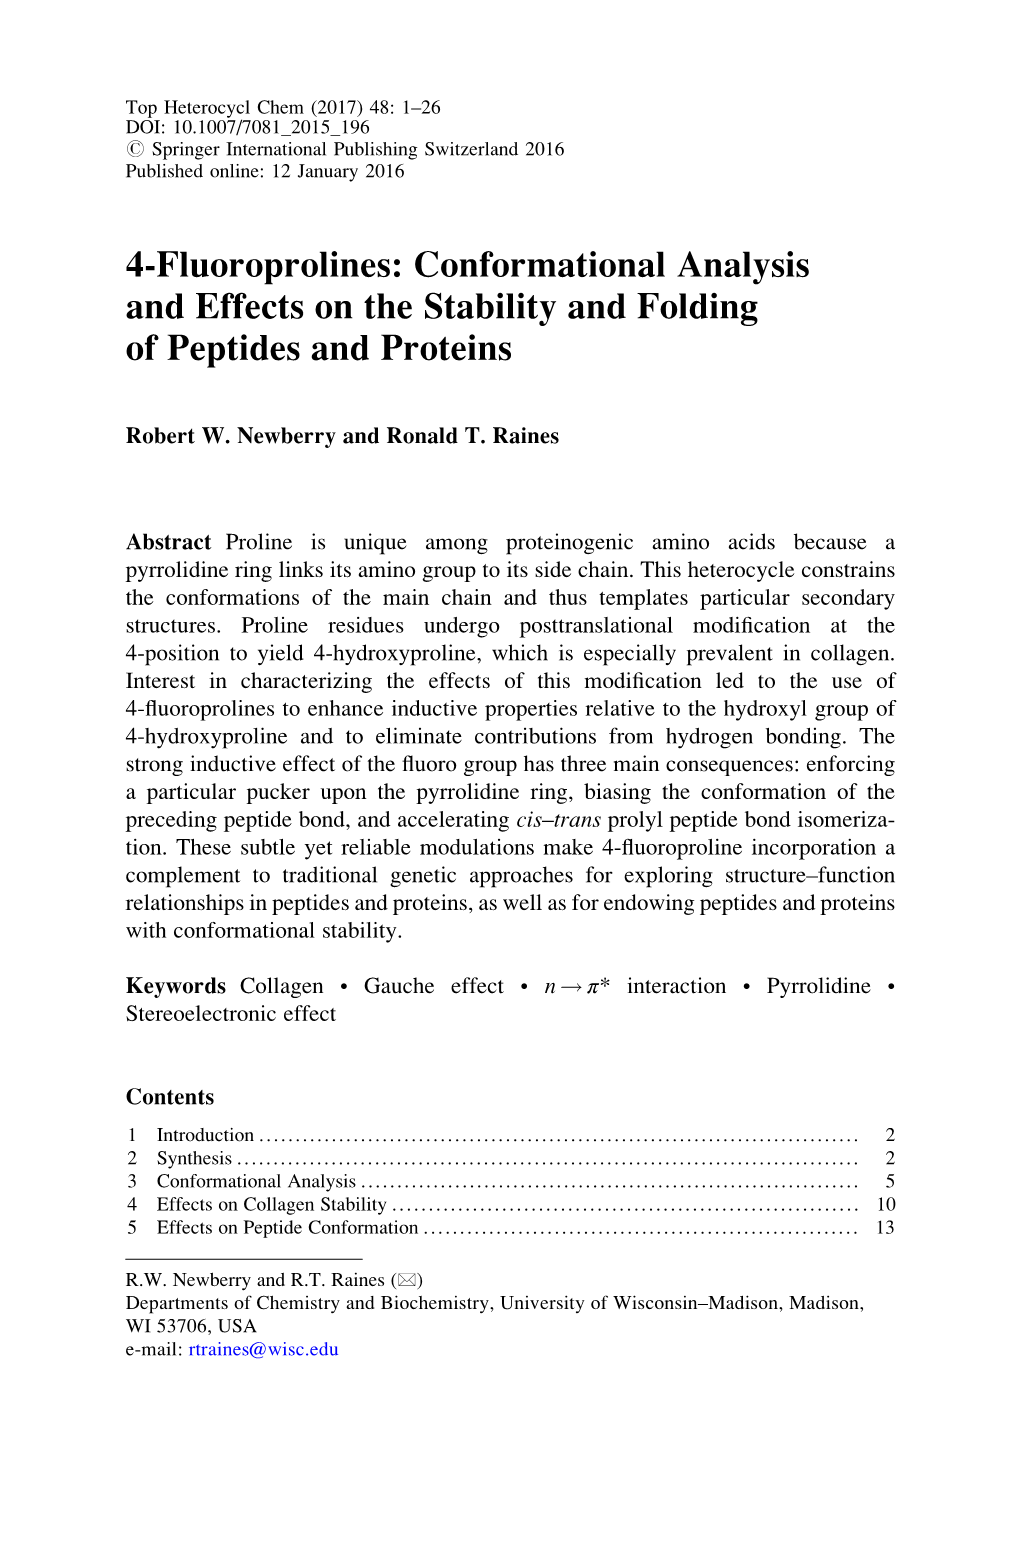 Conformational Analysis and Effects on the Stability and Folding of Peptides and Proteins